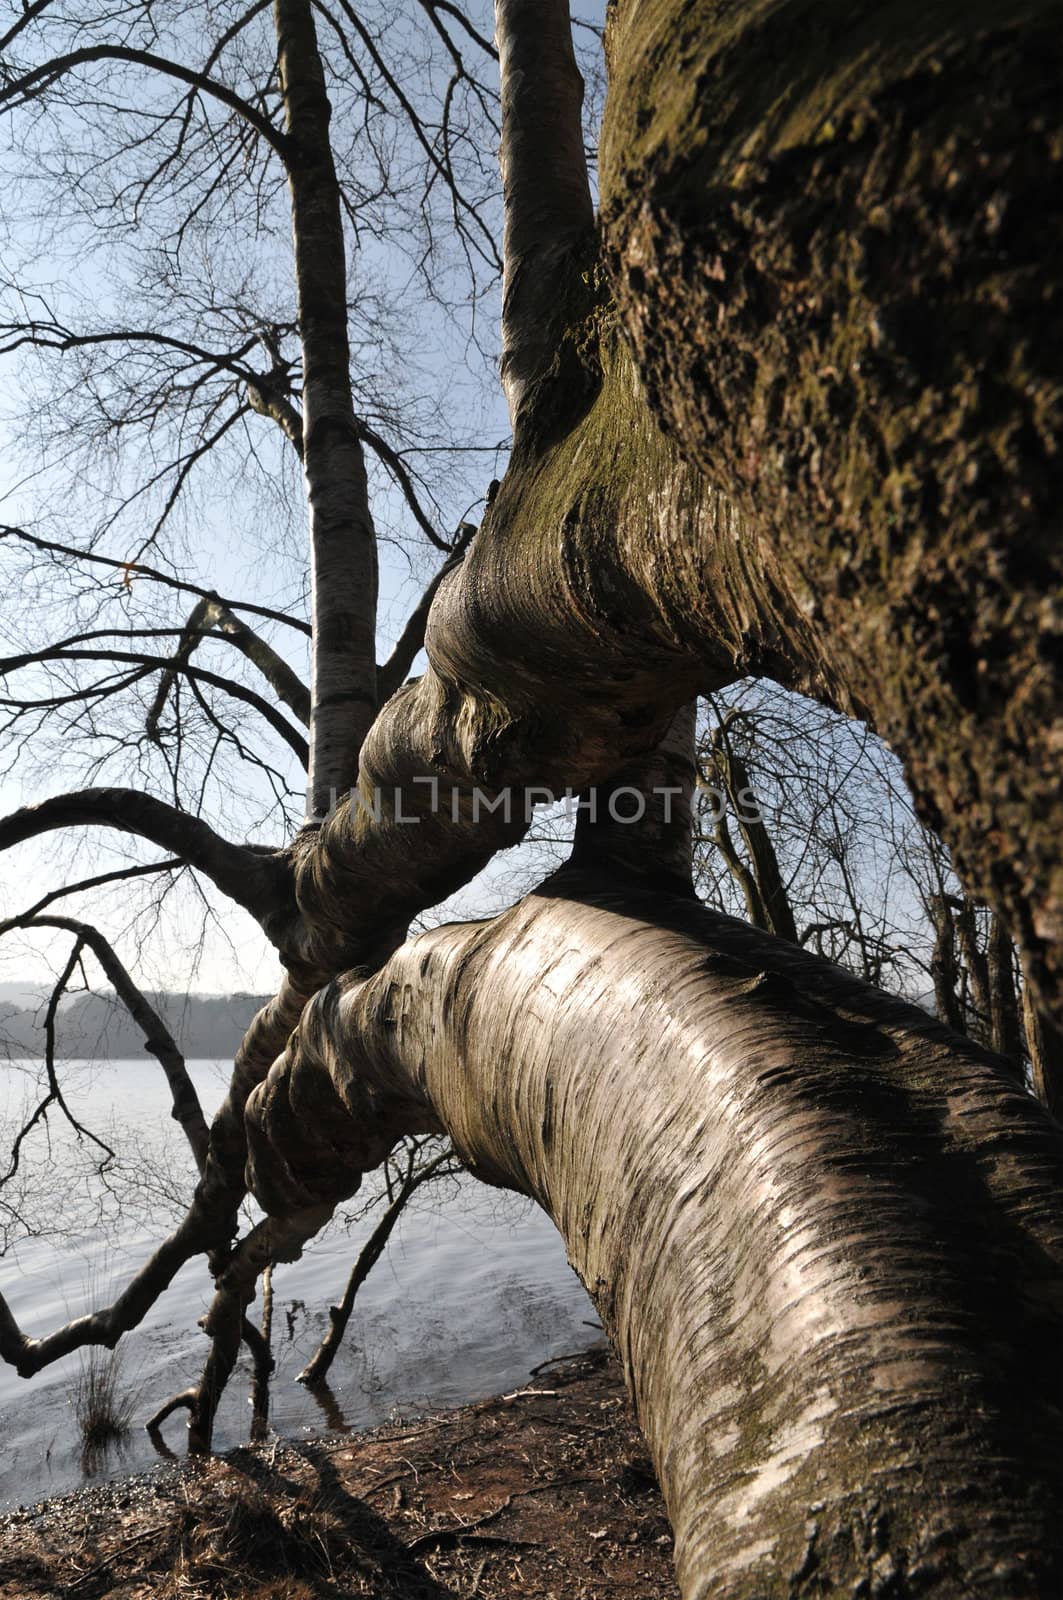 Curved Trunk in the Broceliande Forest by shkyo30